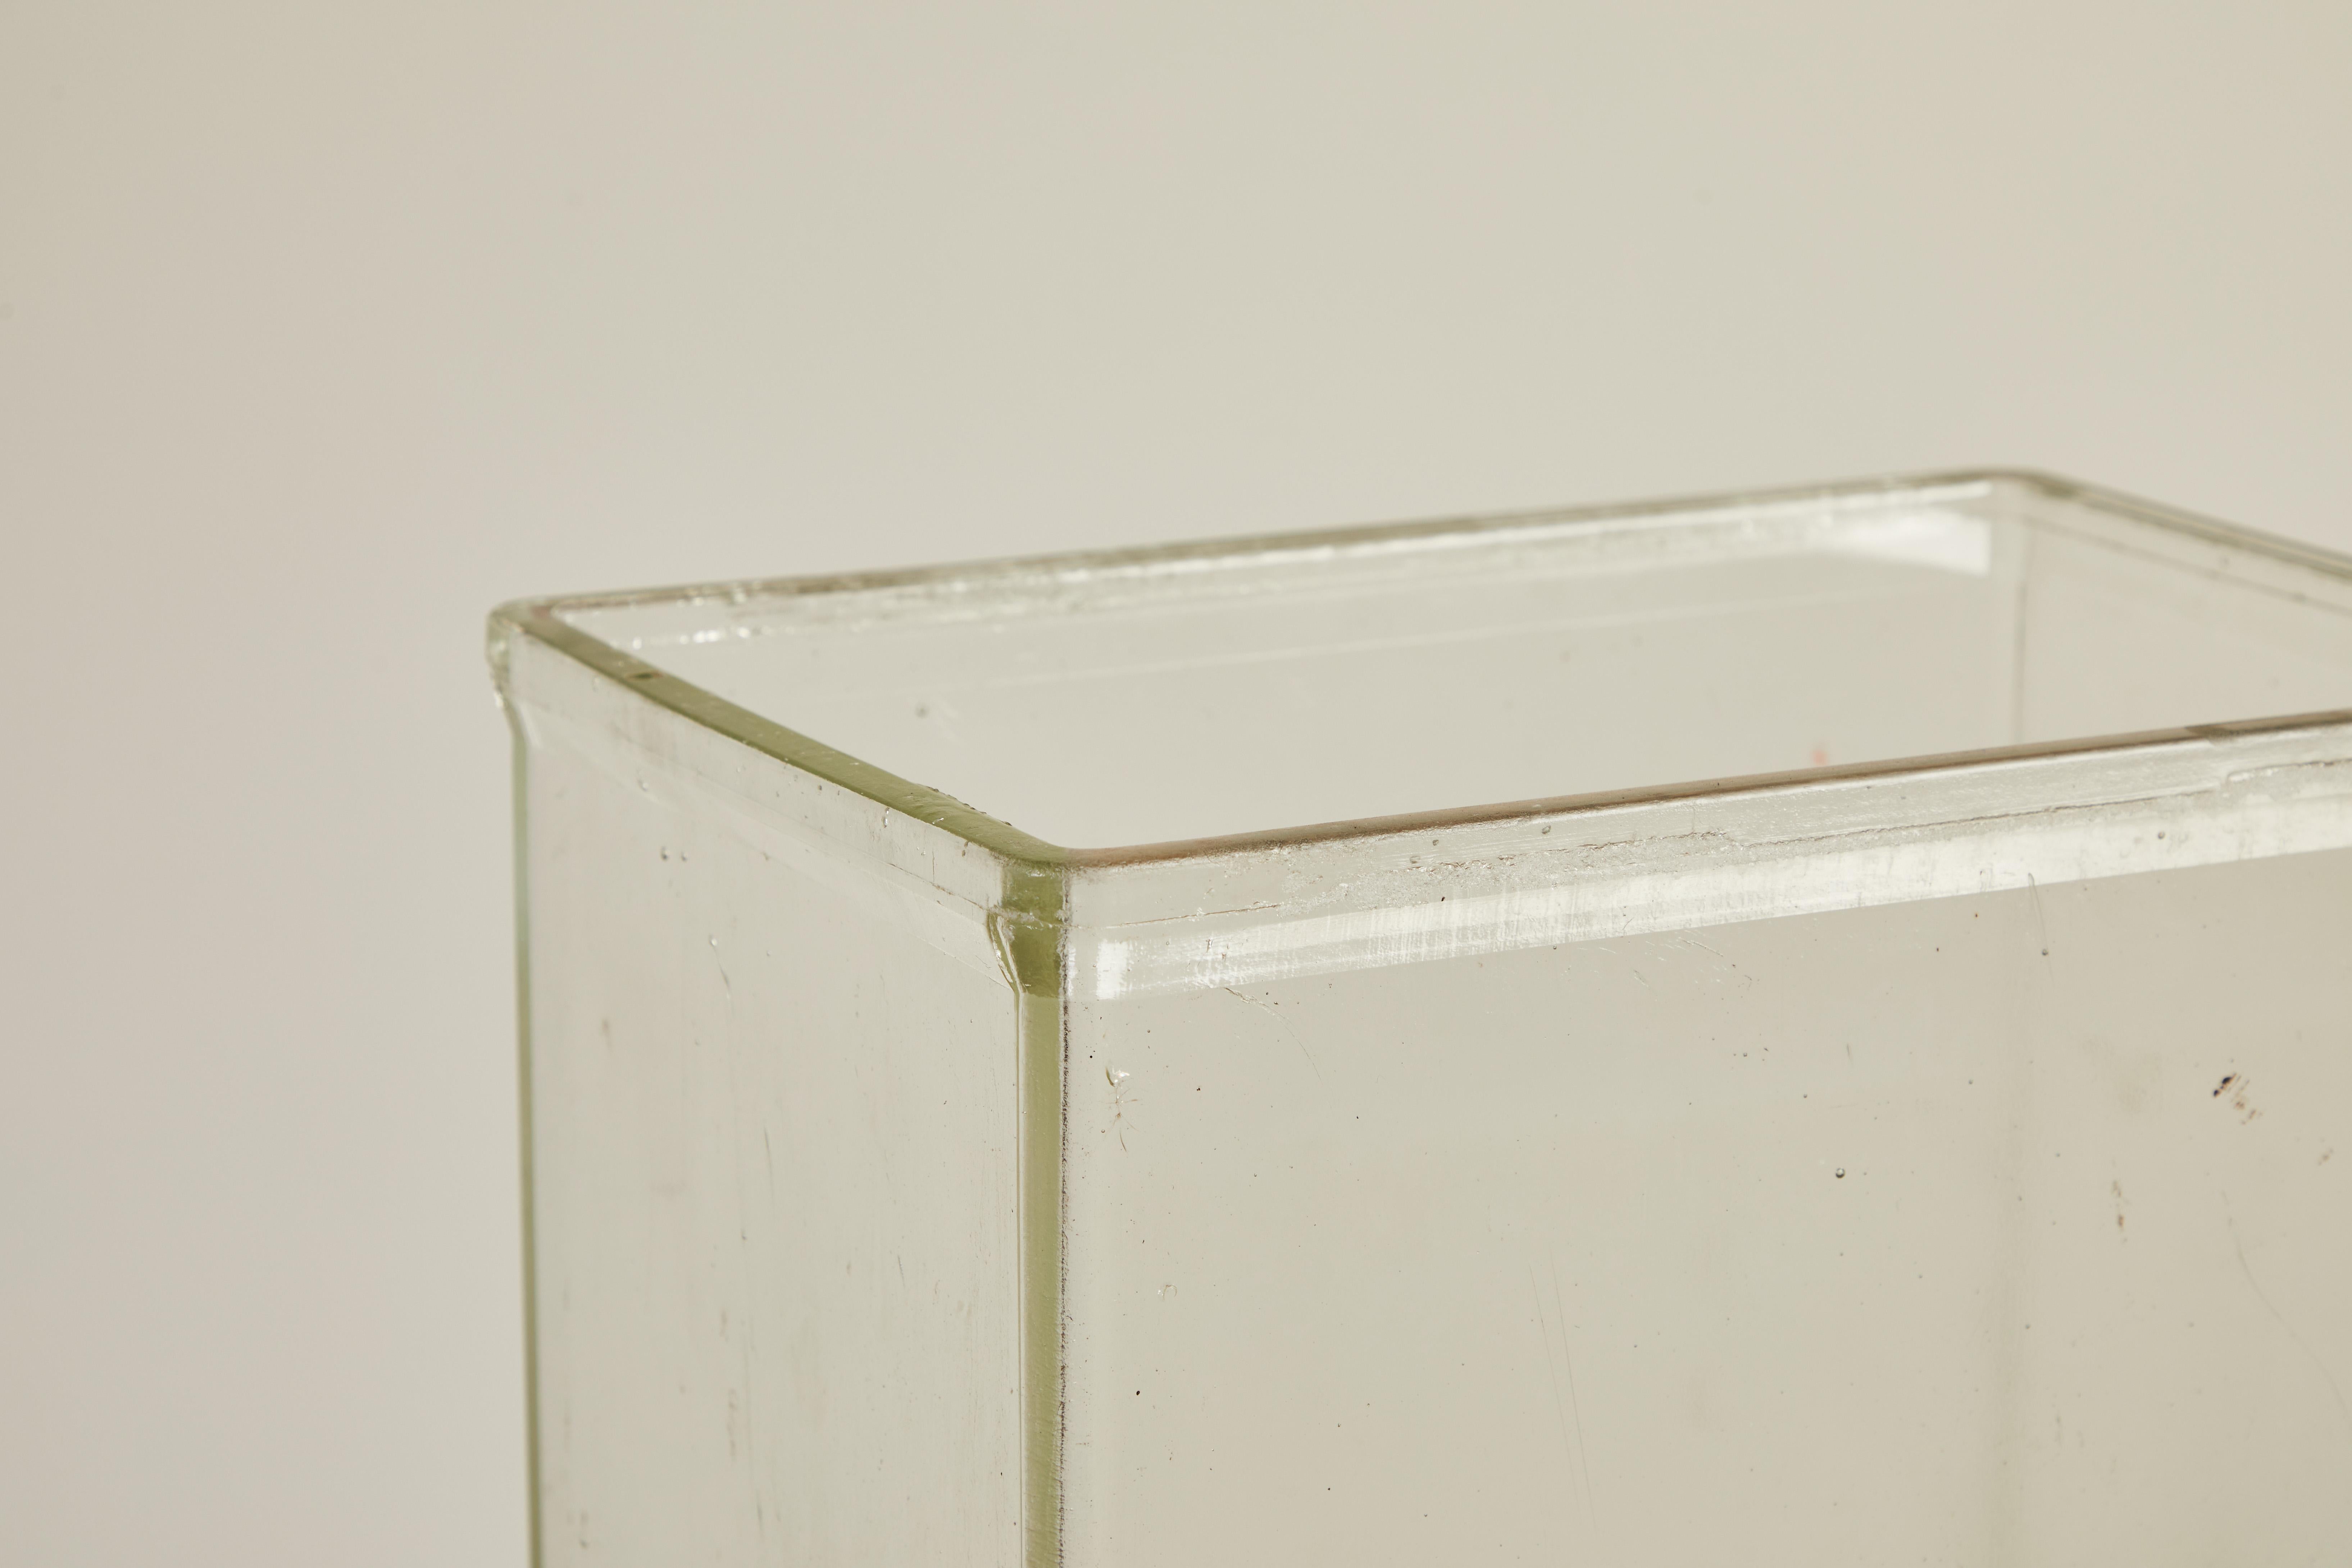 French glass tall rectangular vase, with a slightly curved lip. The glass is thick and sturdy.